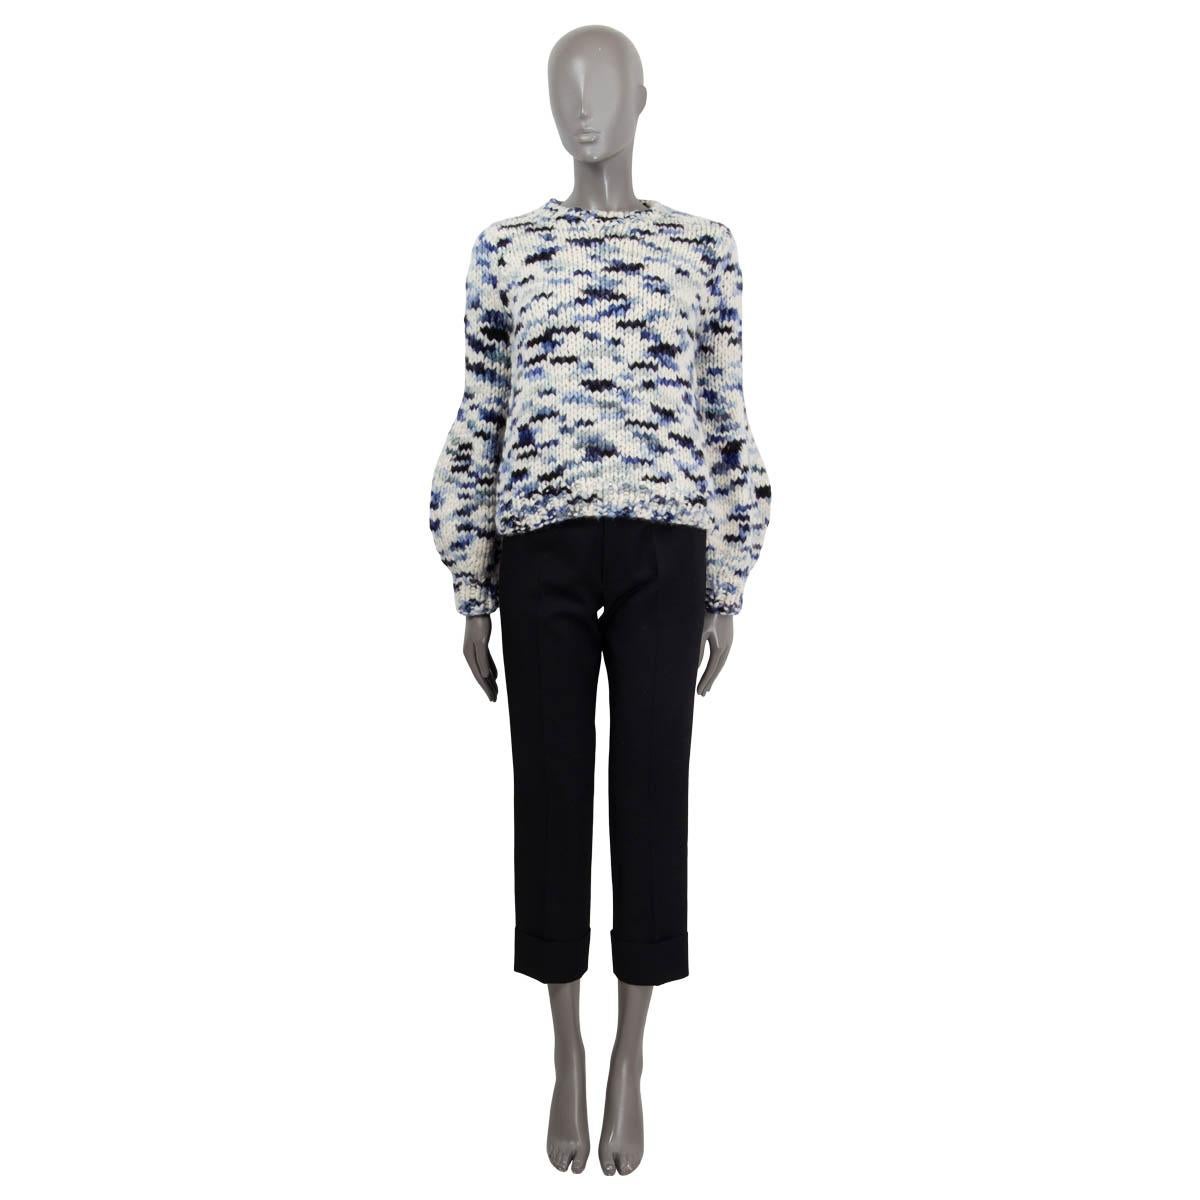 100% authentic Gabriela Hearst Clarissa sweater in ivory and gradient blue space-dyed cashmere (100%). Inspried by the coastal landscapes of Uruguay features a thick braid-knit, crewneck and latern sleeves. Has been worn and is in virtually new